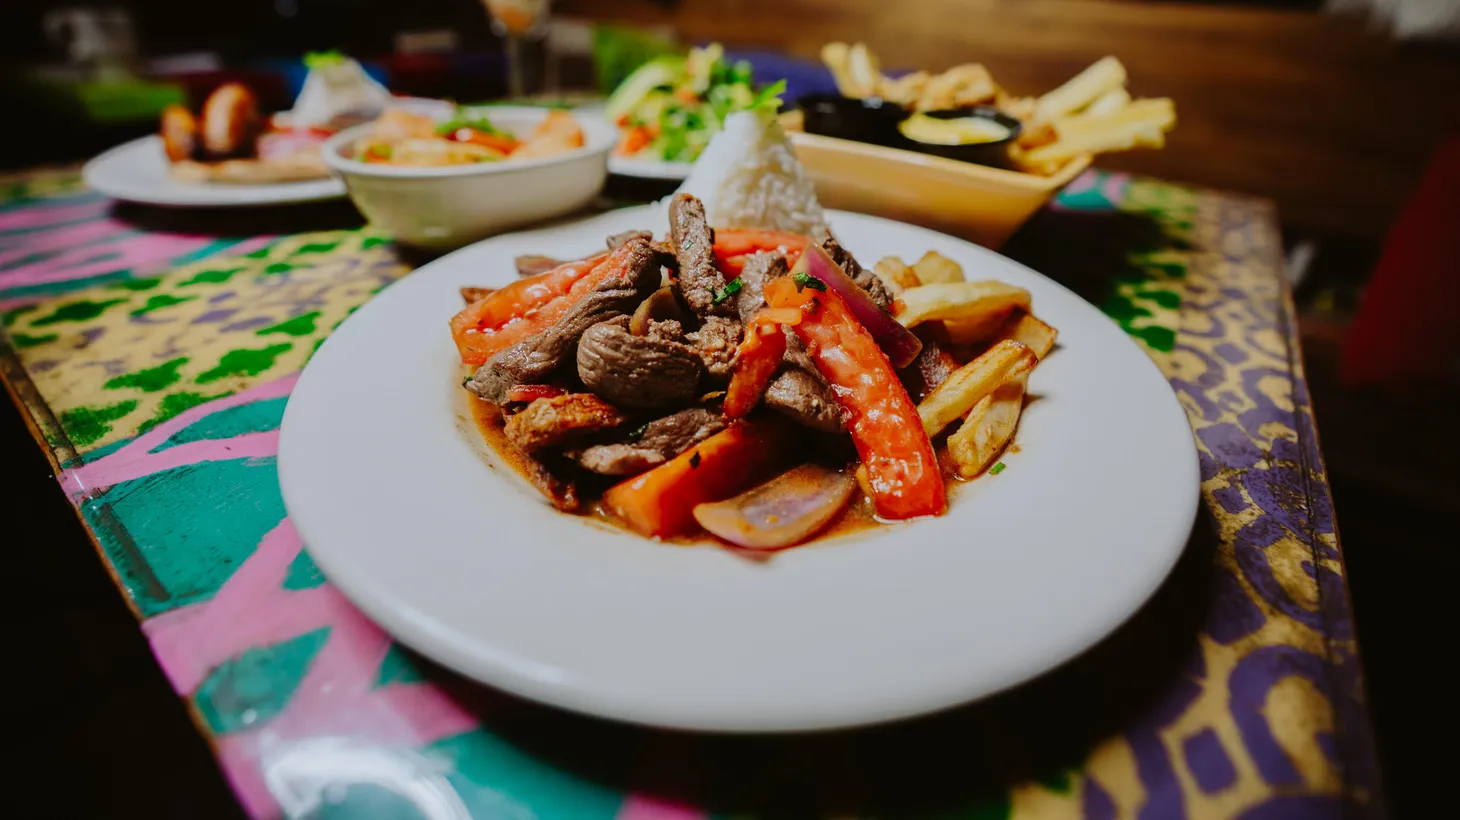 A traditional dish of lomo saltado is featured on the menu at Qusqo Bistro.